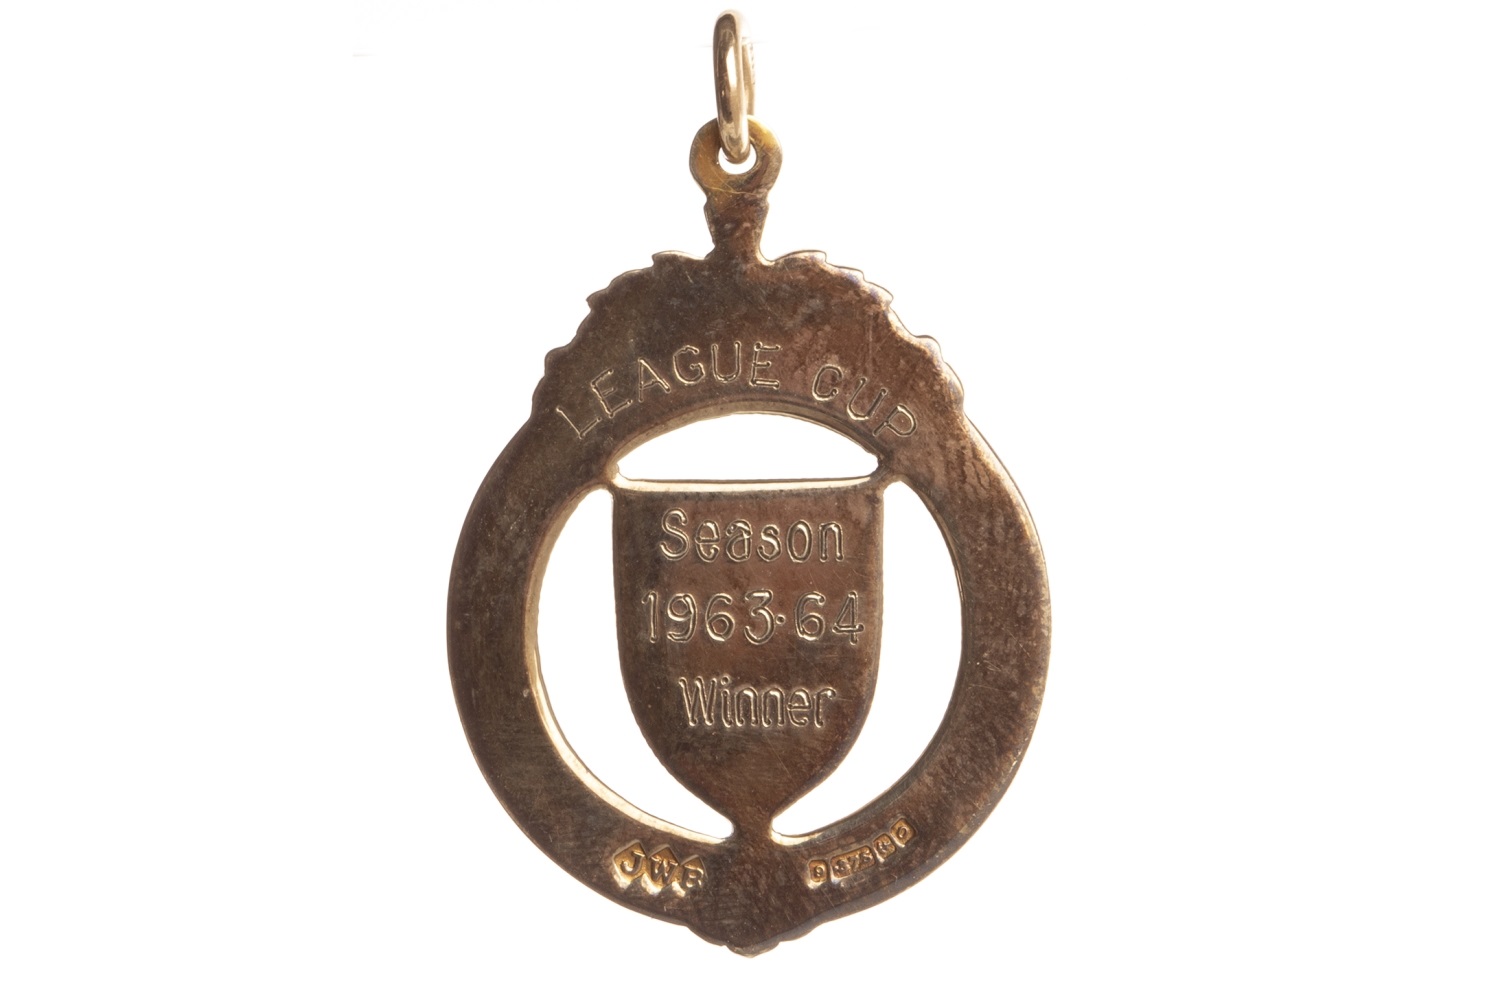 BOBBY SHEARER 'CAPTAIN CUTLASS' OF RANGERS F.C. - HIS S.F.L. LEAGUE CUP WINNERS GOLD MEDAL 1964 - Image 2 of 2